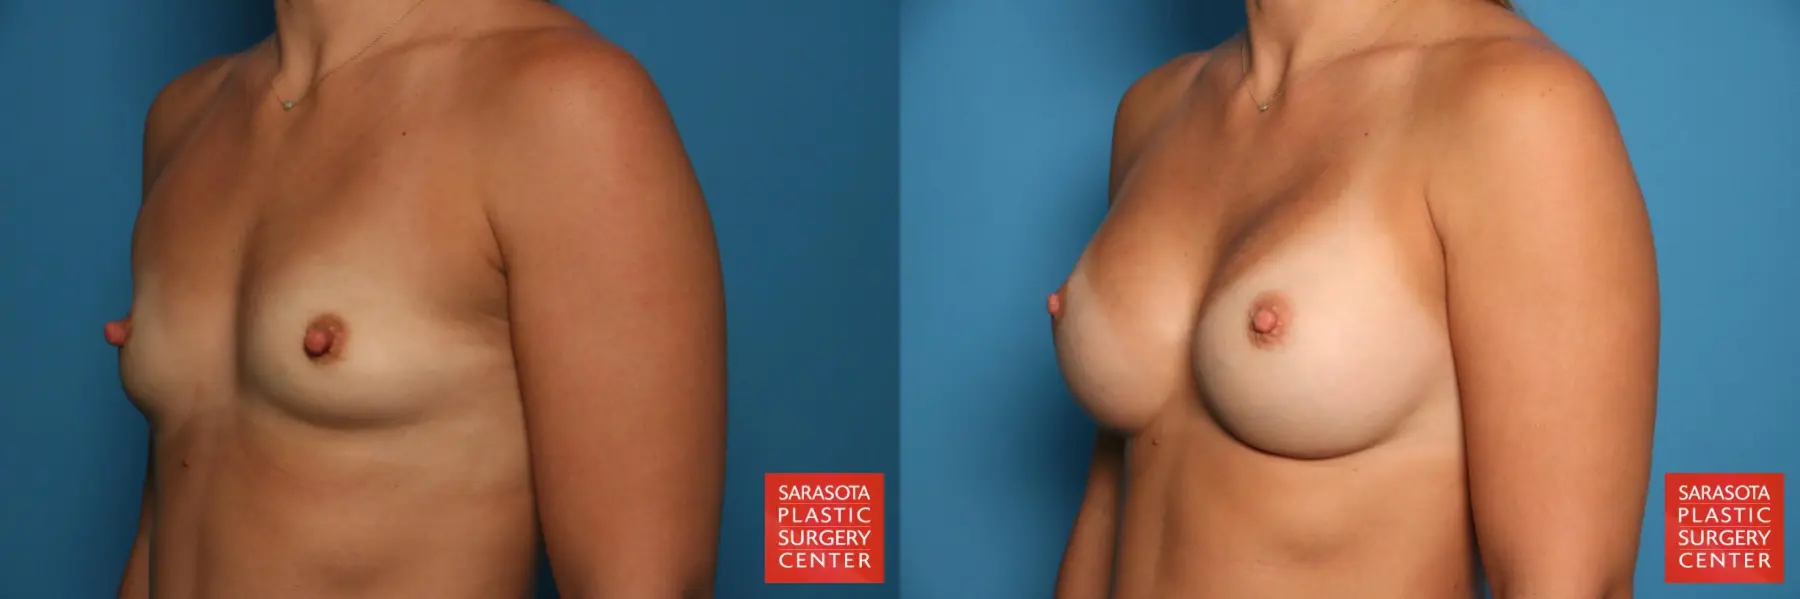 Breast Augmentation: Patient 5 - Before and After 2